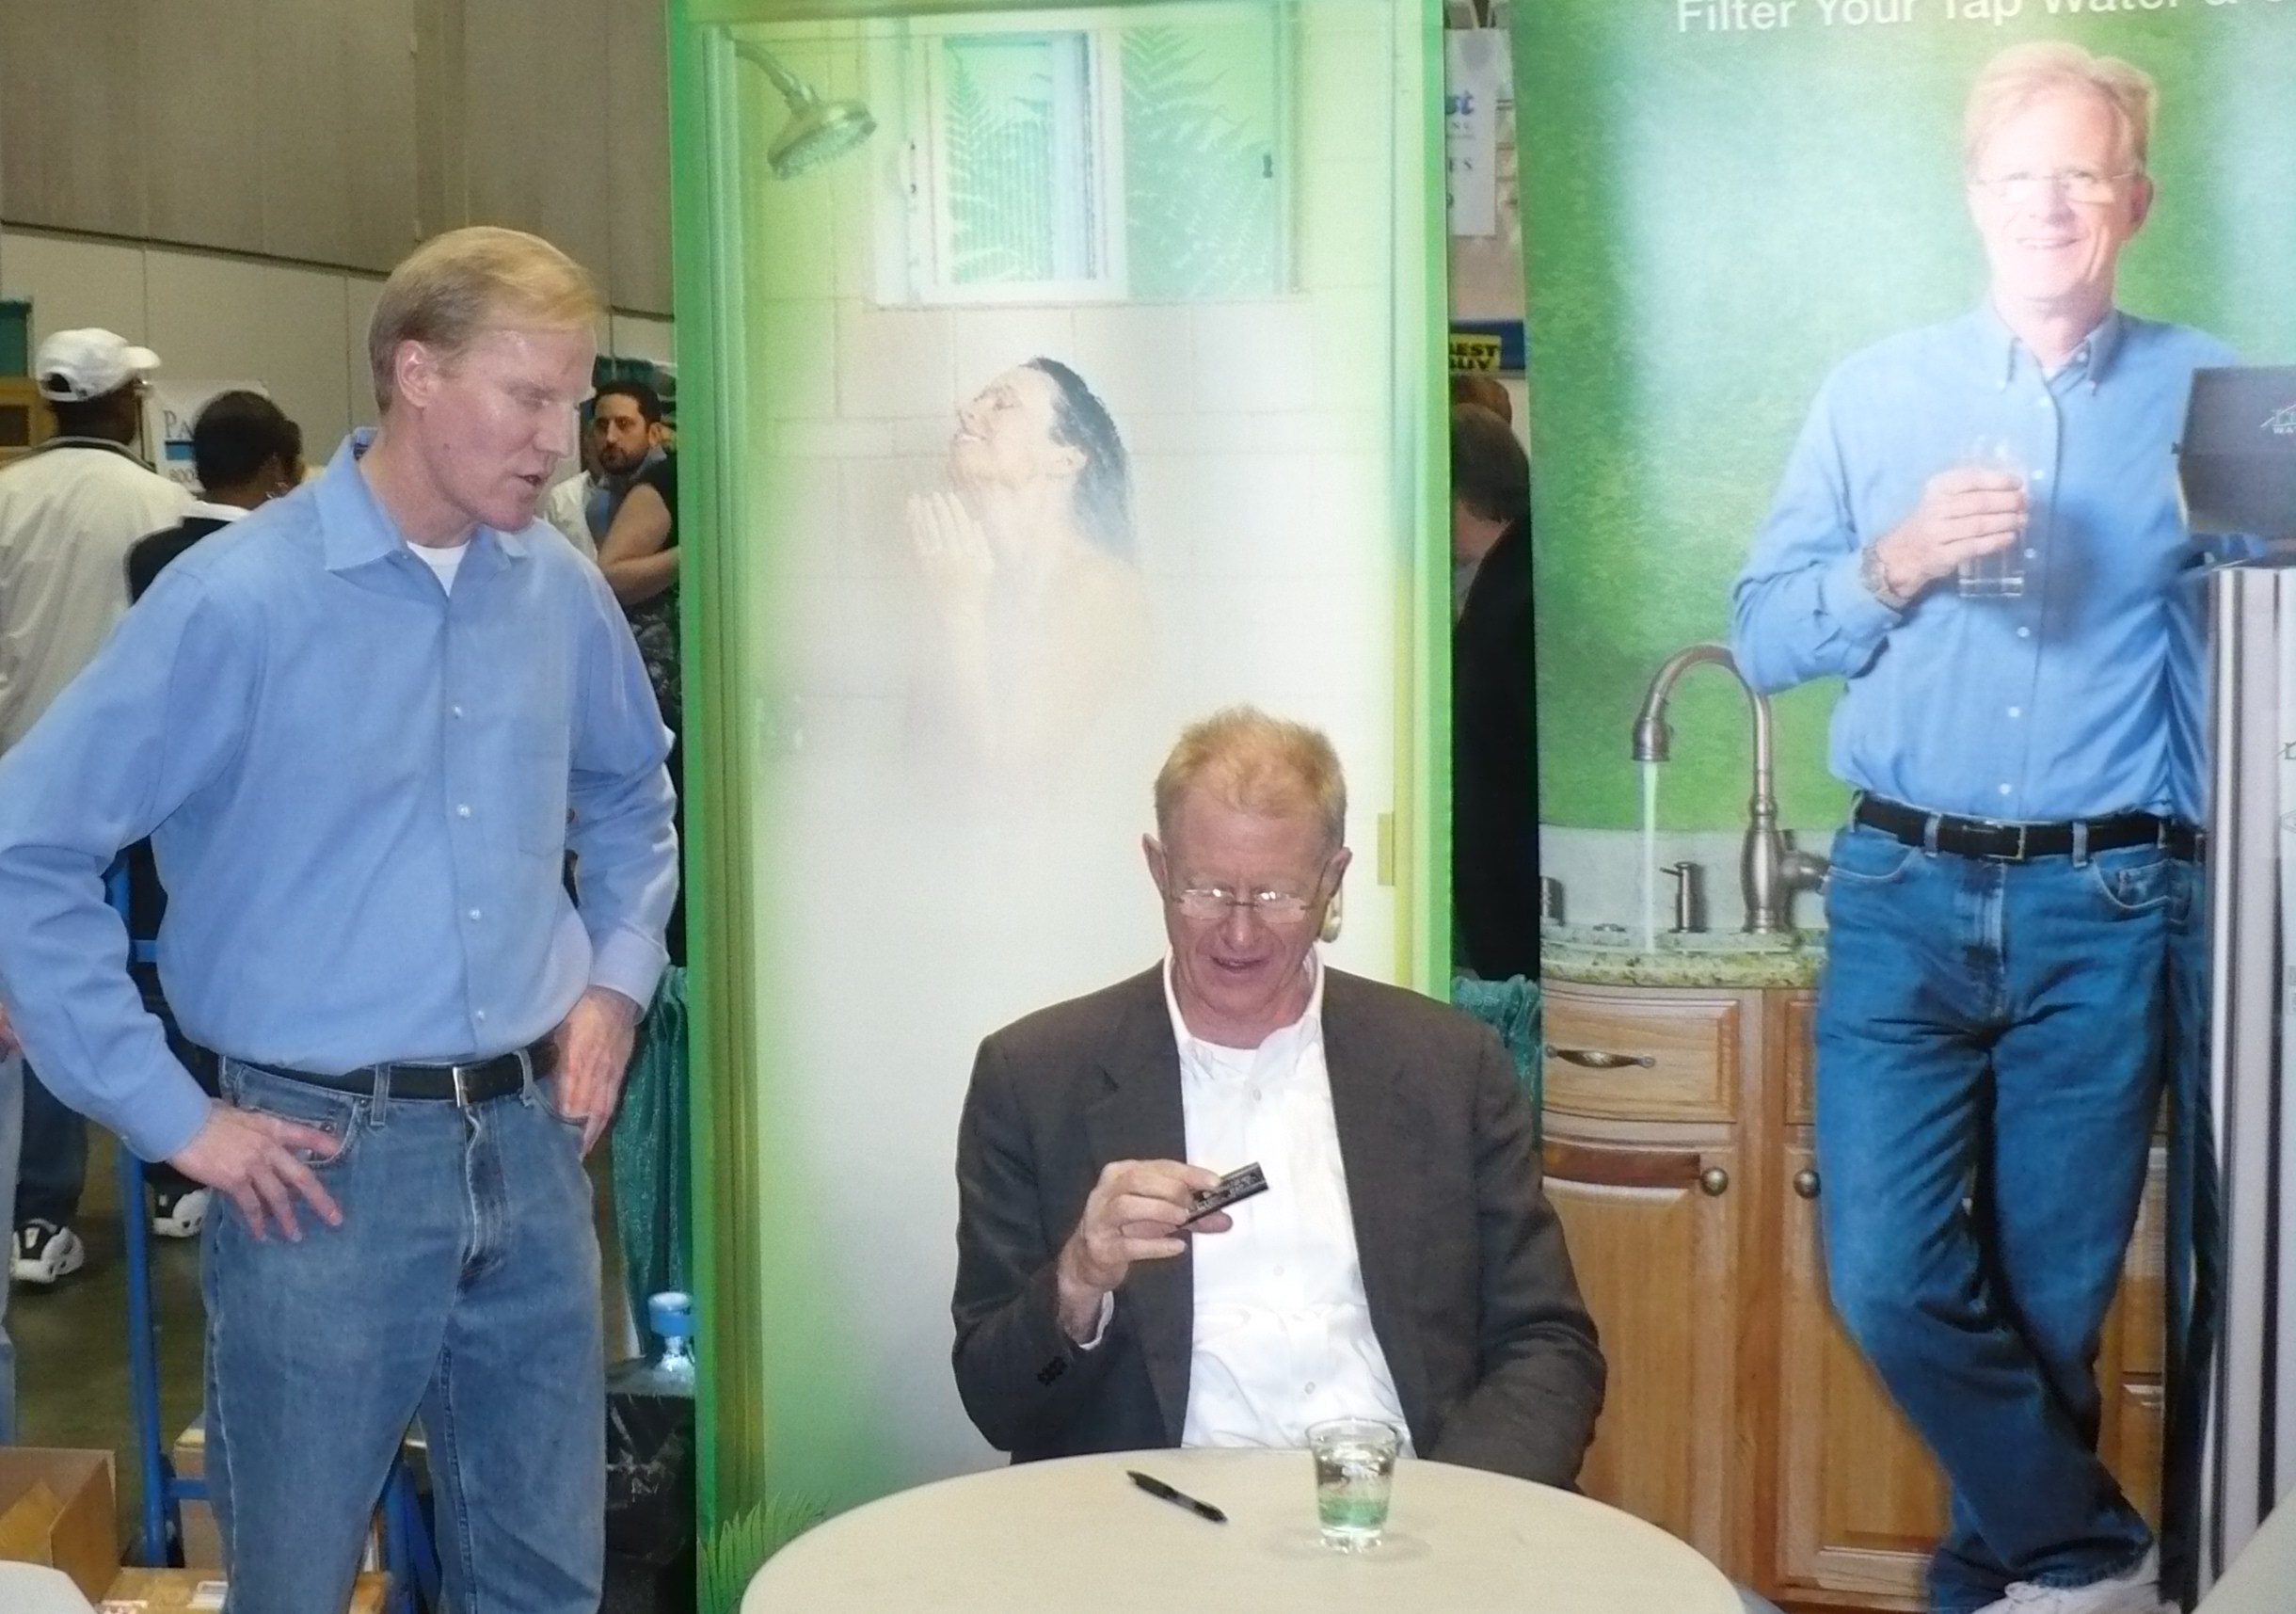 chatting w- Ed Begley, Jr. about Electric Cars.